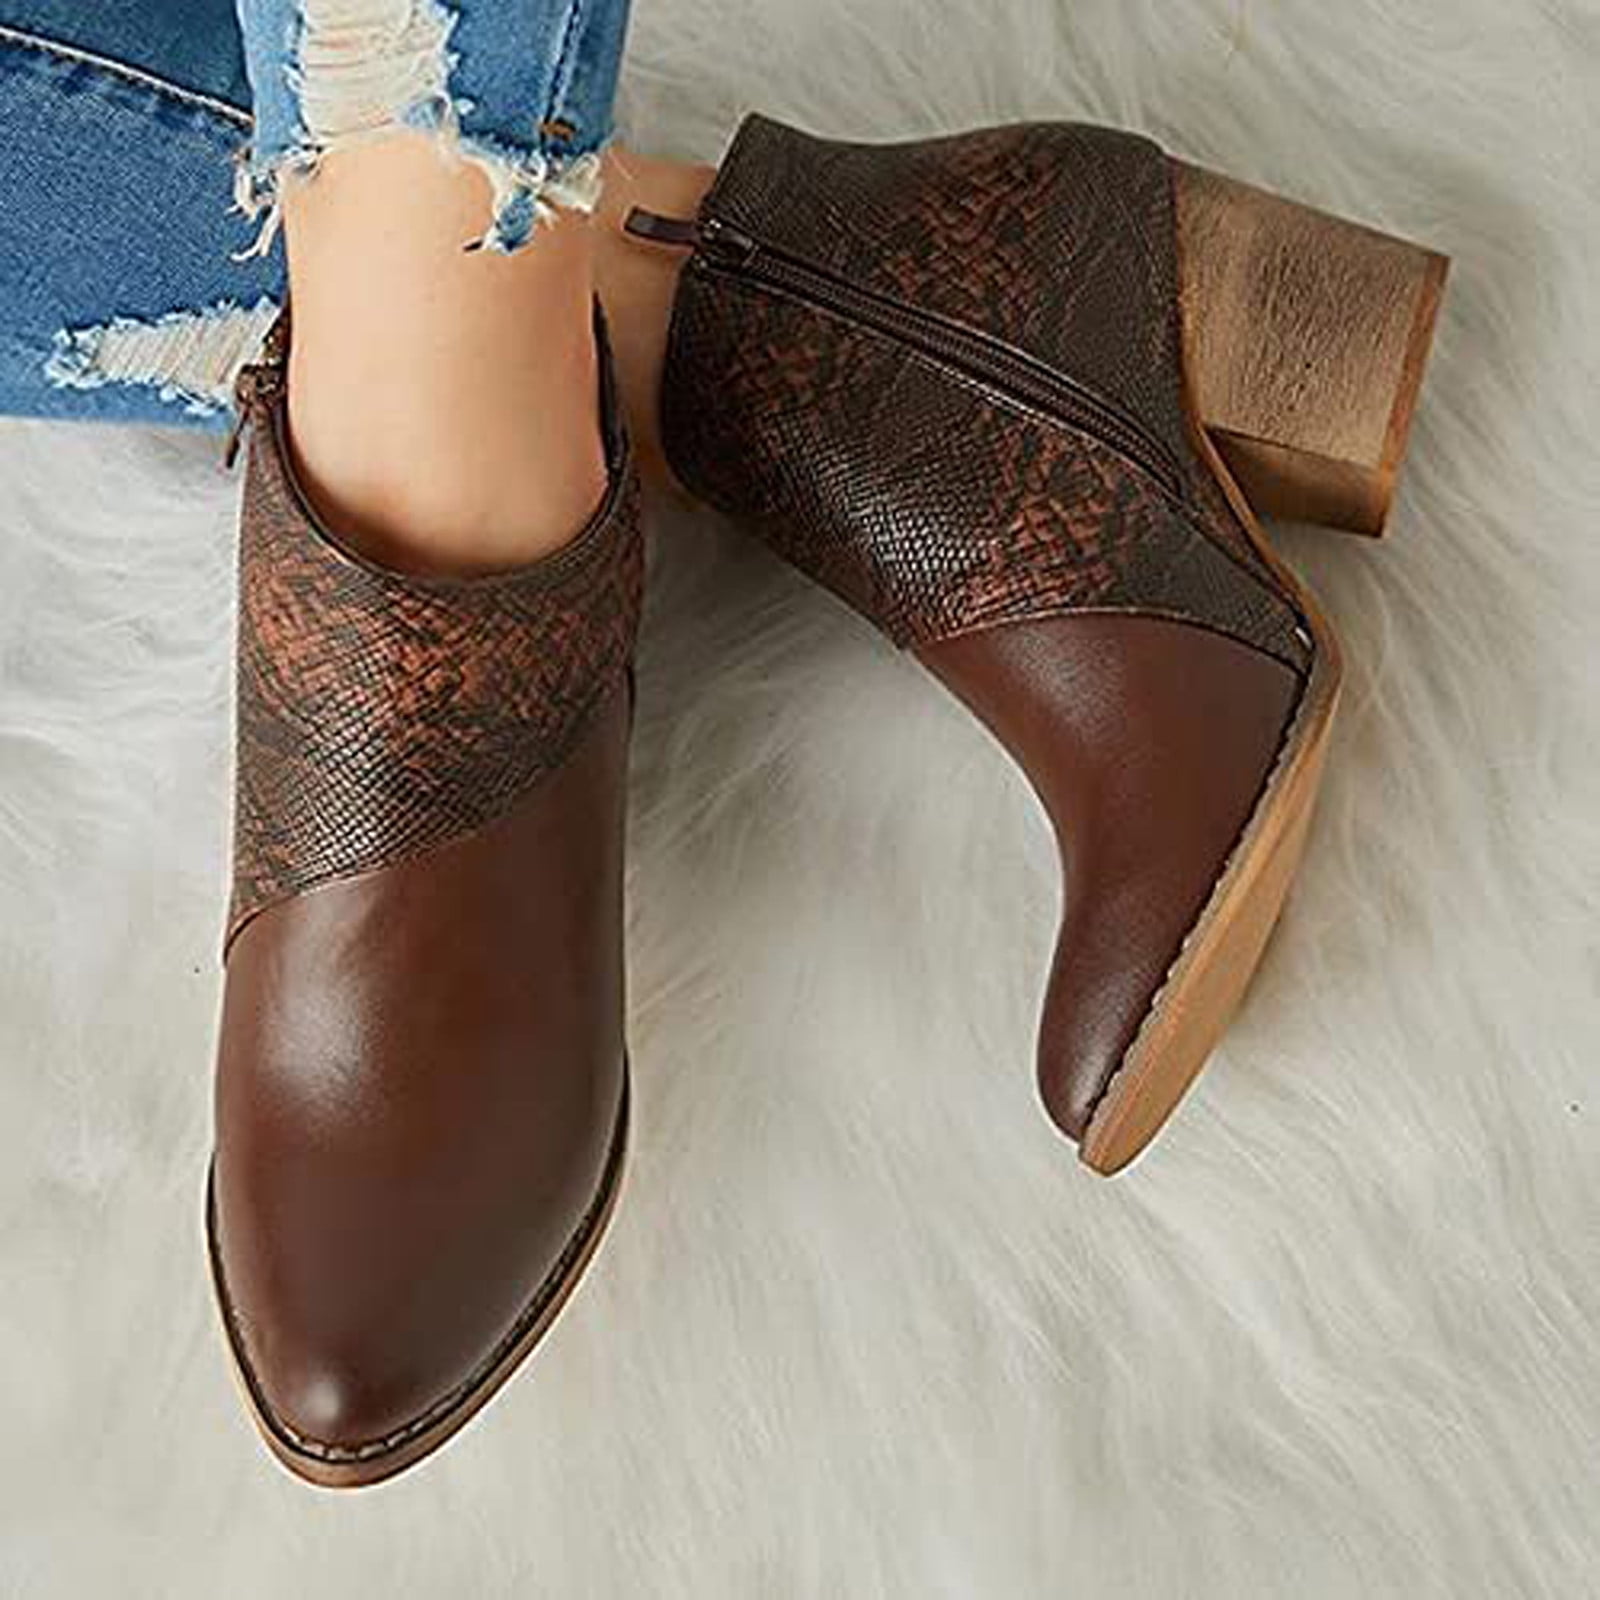 Comfy Faux Leather Fashion Patchwork Square Toe Mid-Calf Boot Shoes for Women Medium Chunky Heel Booties Side Zipper Womens Lace Up Riding Boots 